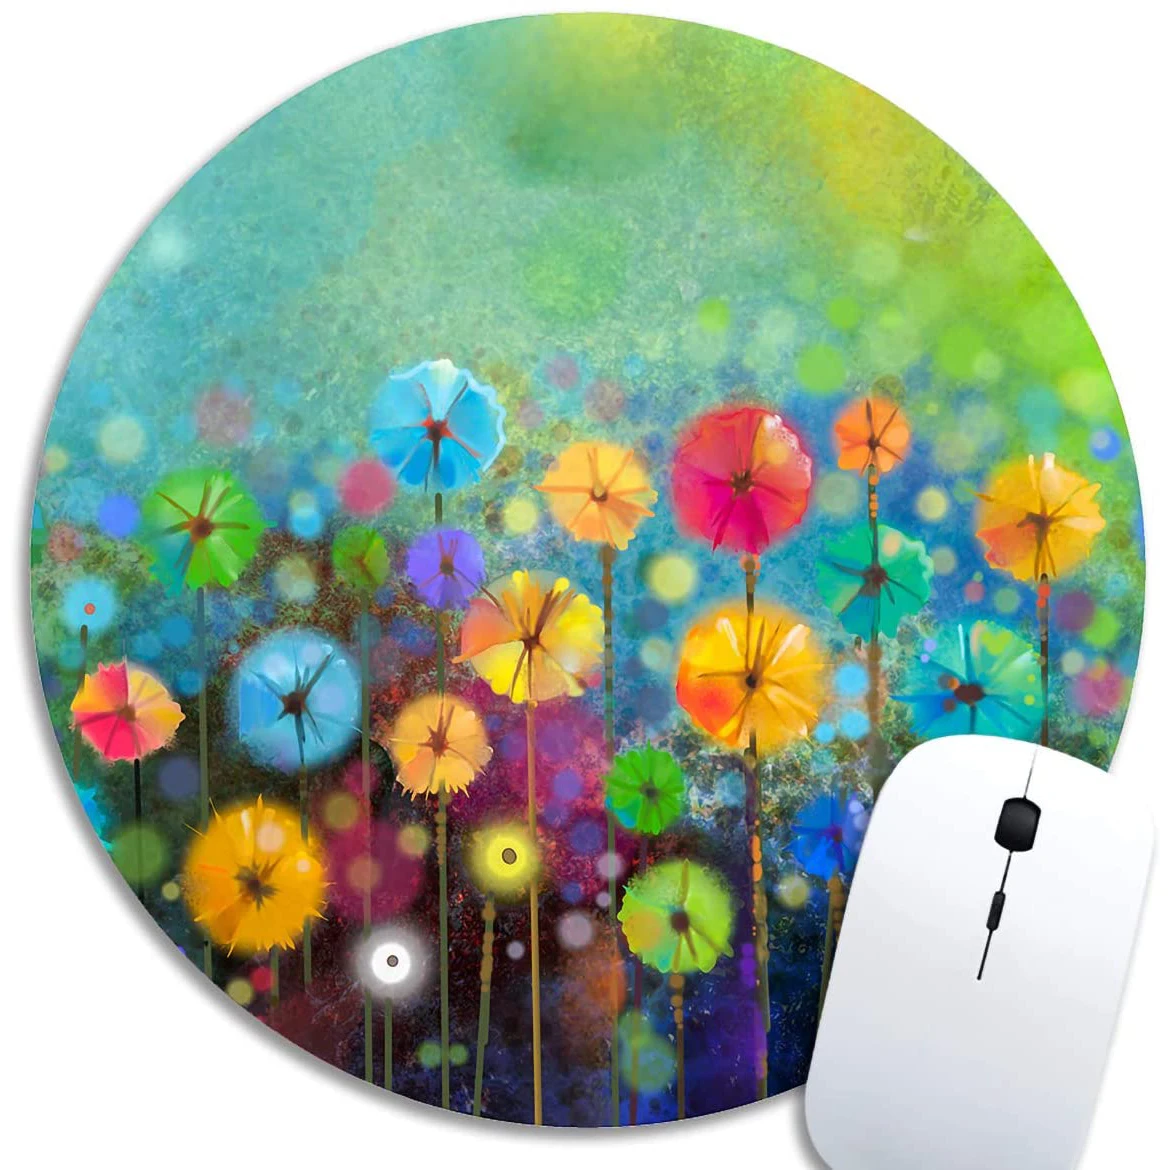 
custom round mouse pad circular mouse pad with design non-slip rubber base mouse pad mat 